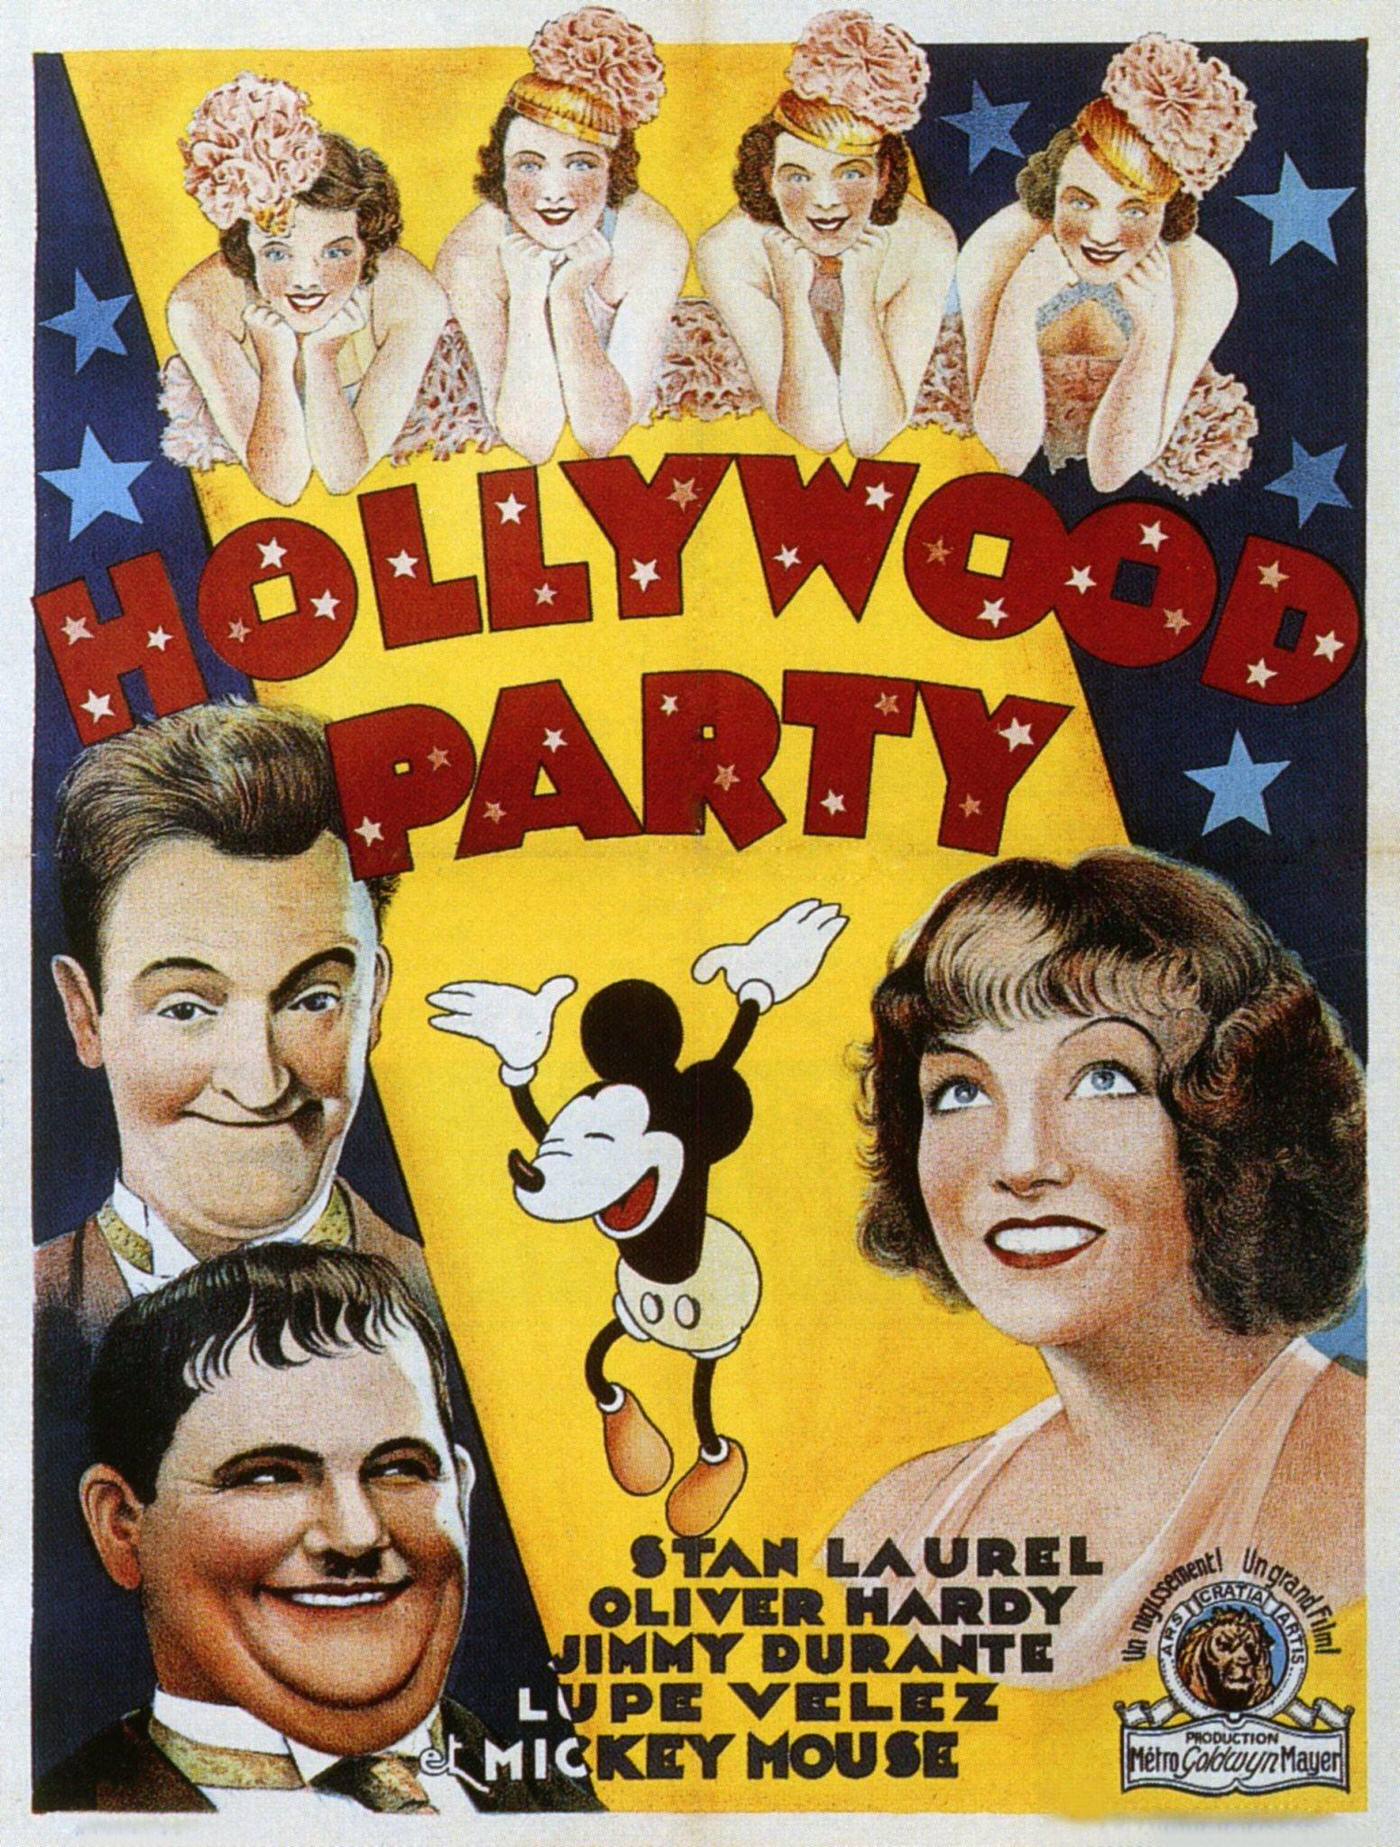 Hollywood Party, poster, Stan Laurel, Oliver Hardy, Lupe Velez, and Mickey Mouse, 1934.